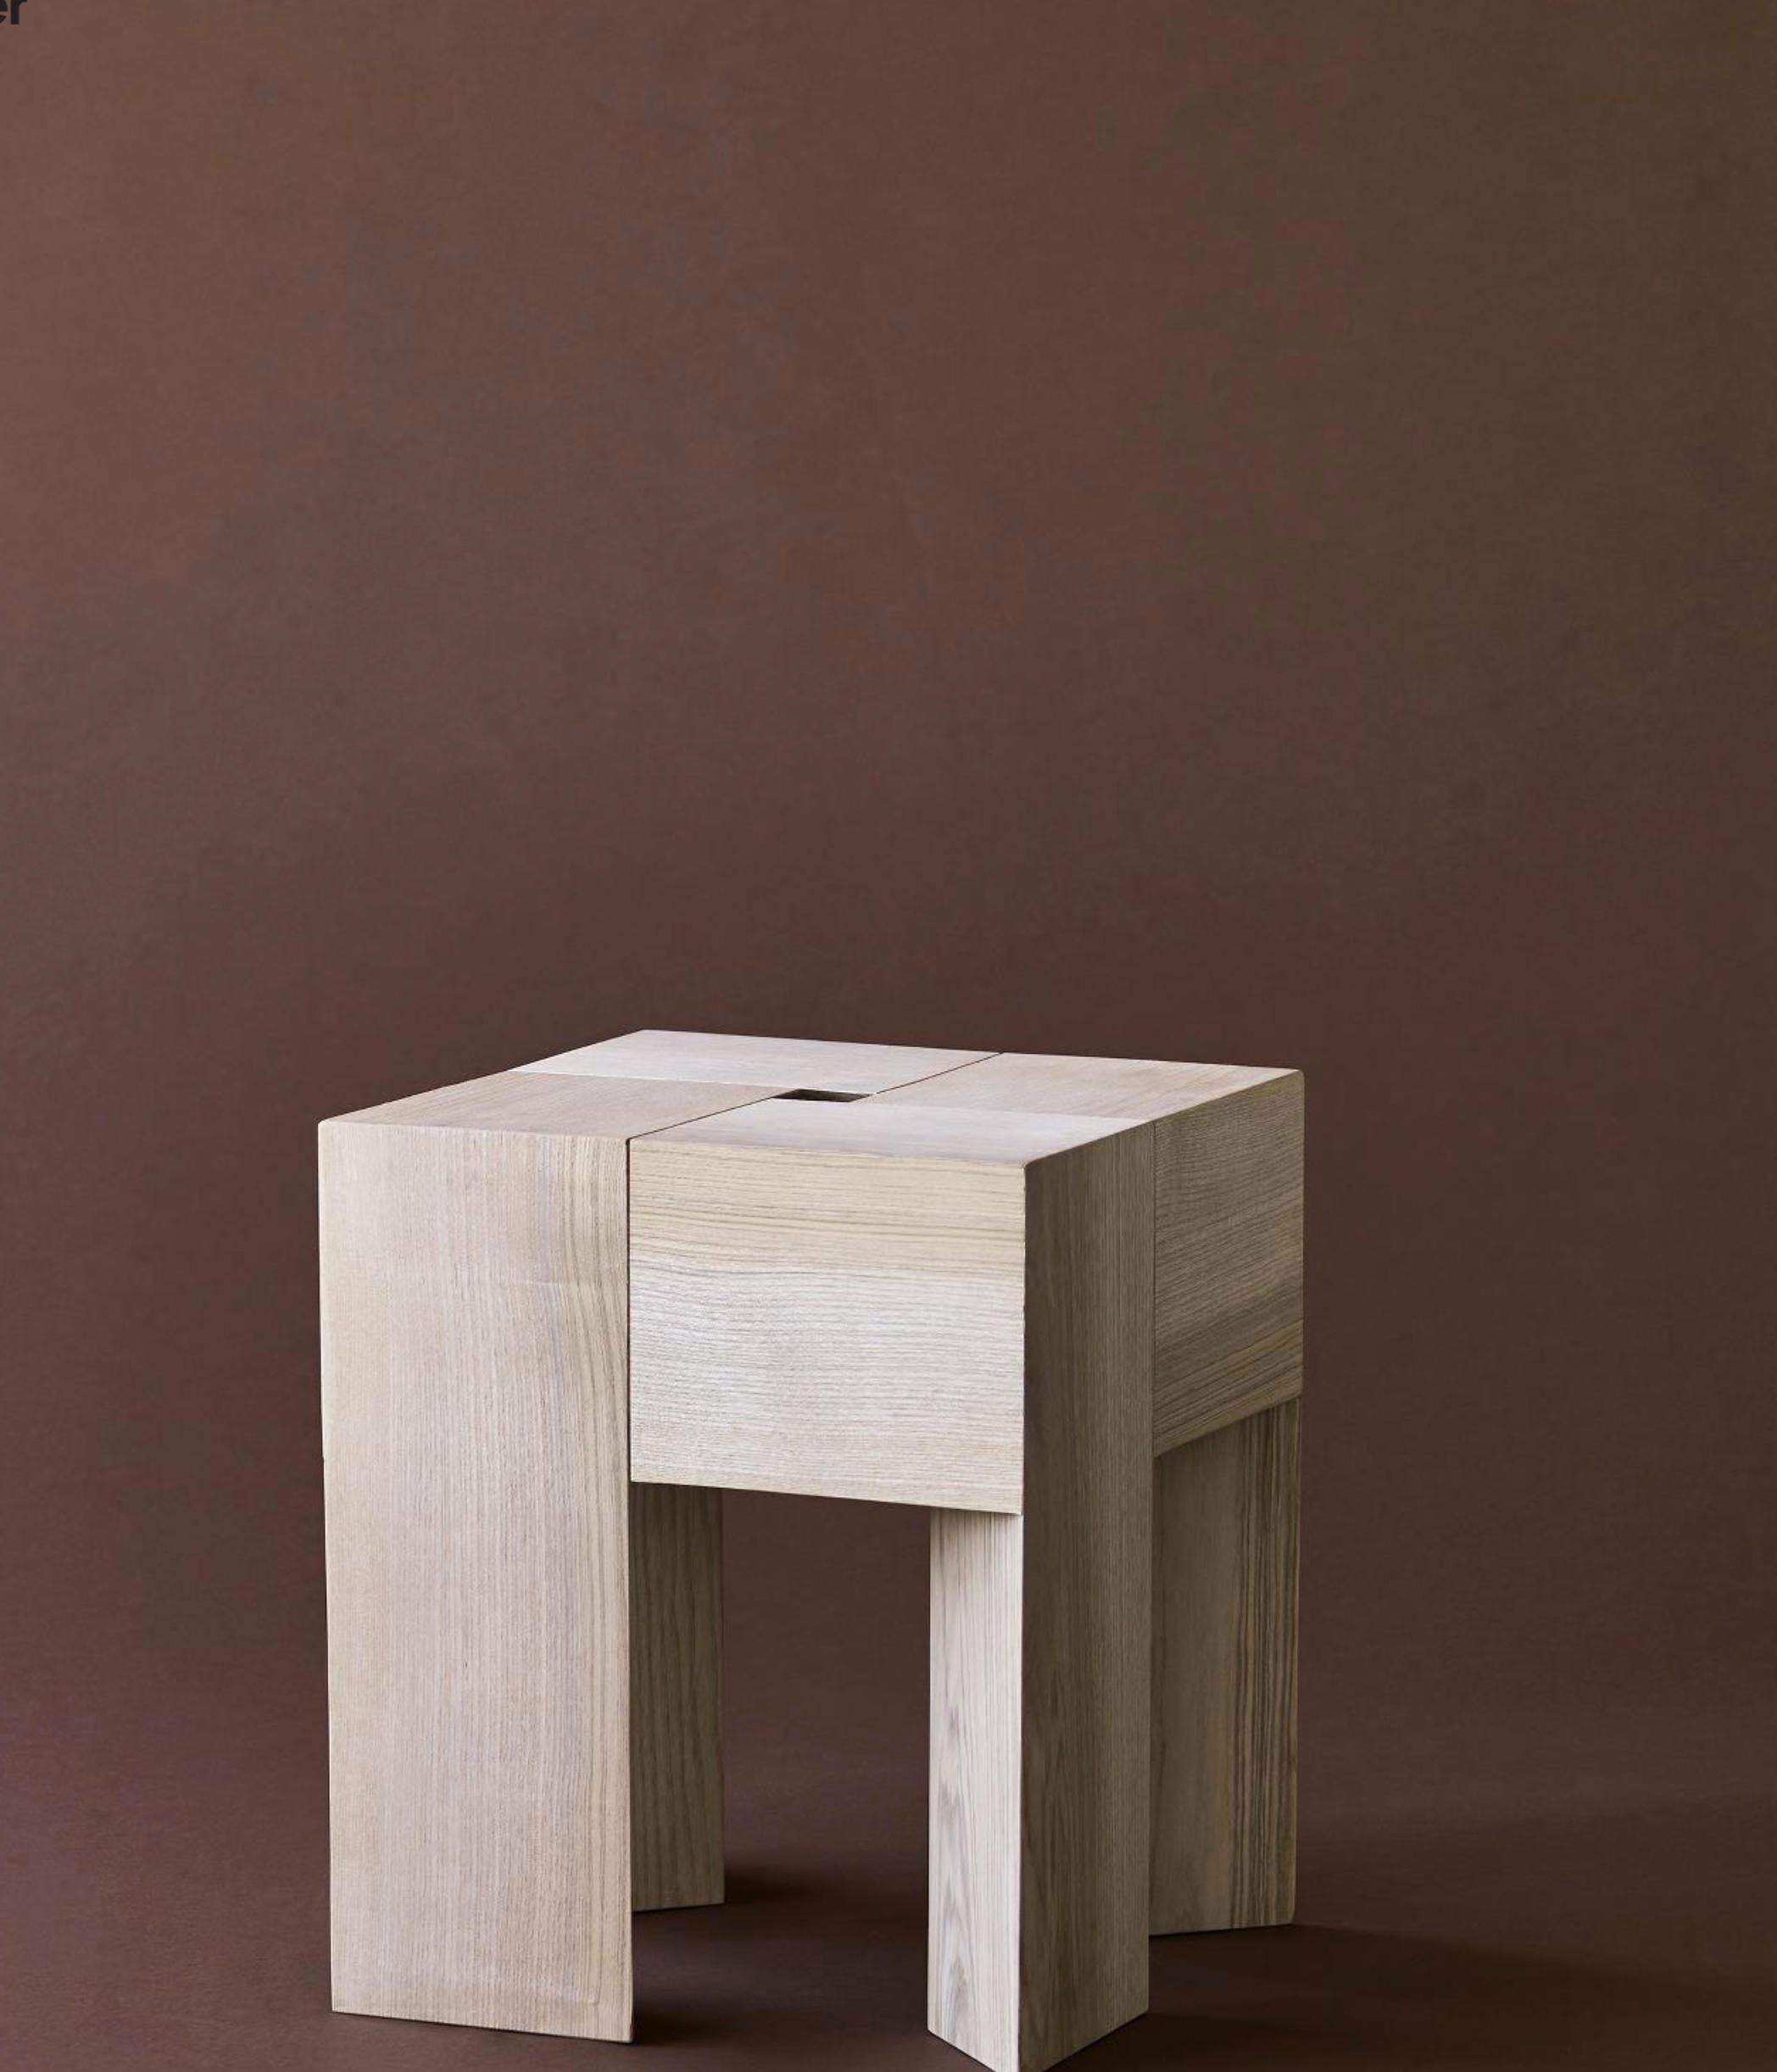 Stool or side table designed by Aldo Bakker in 1996. Material: Solid ash, finish: clear lacquered. 